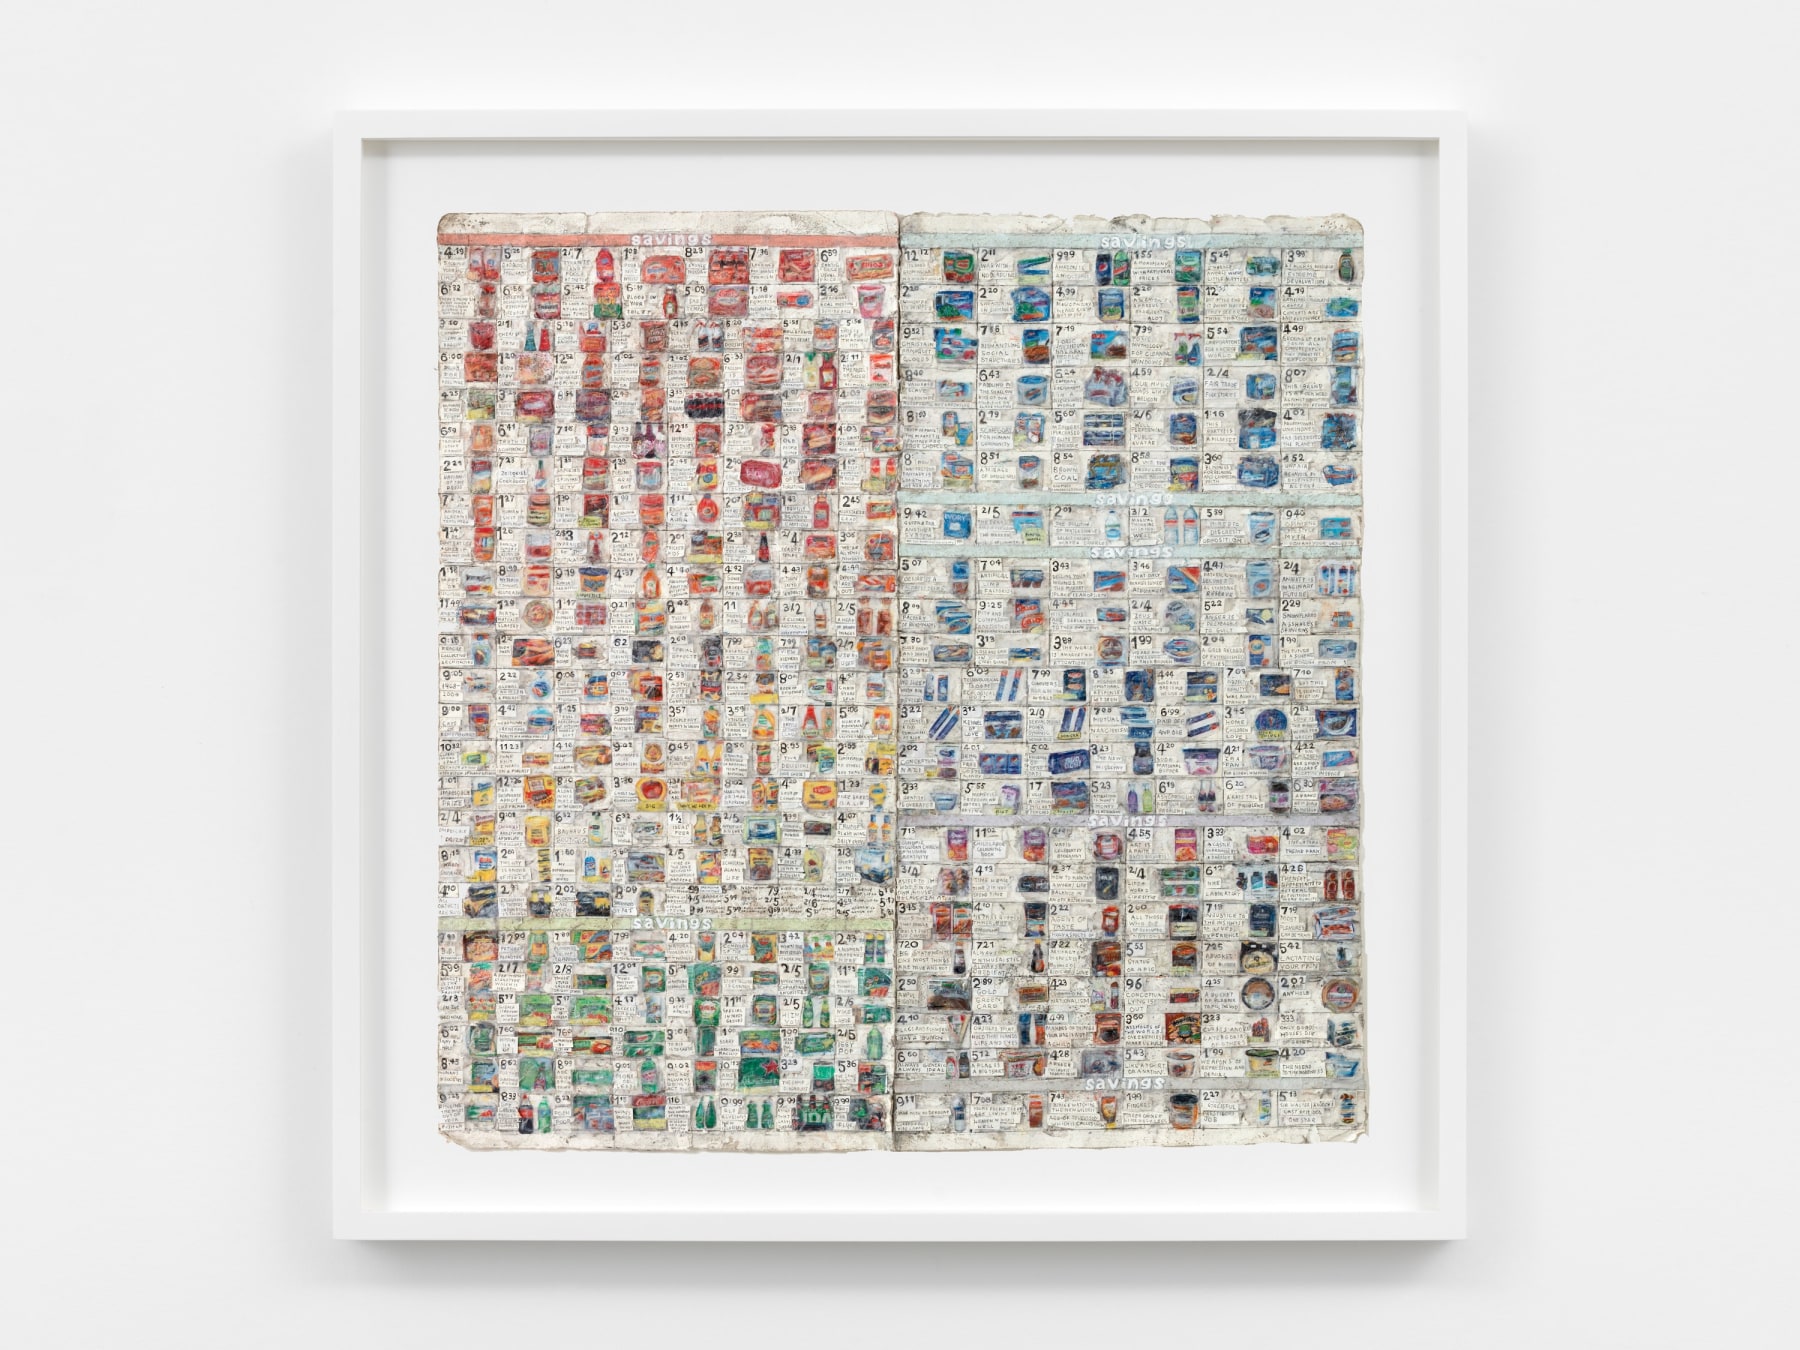 Mixed media piece depicting household items and their corresponding prices organized by color by SIMON EVANS &trade;.